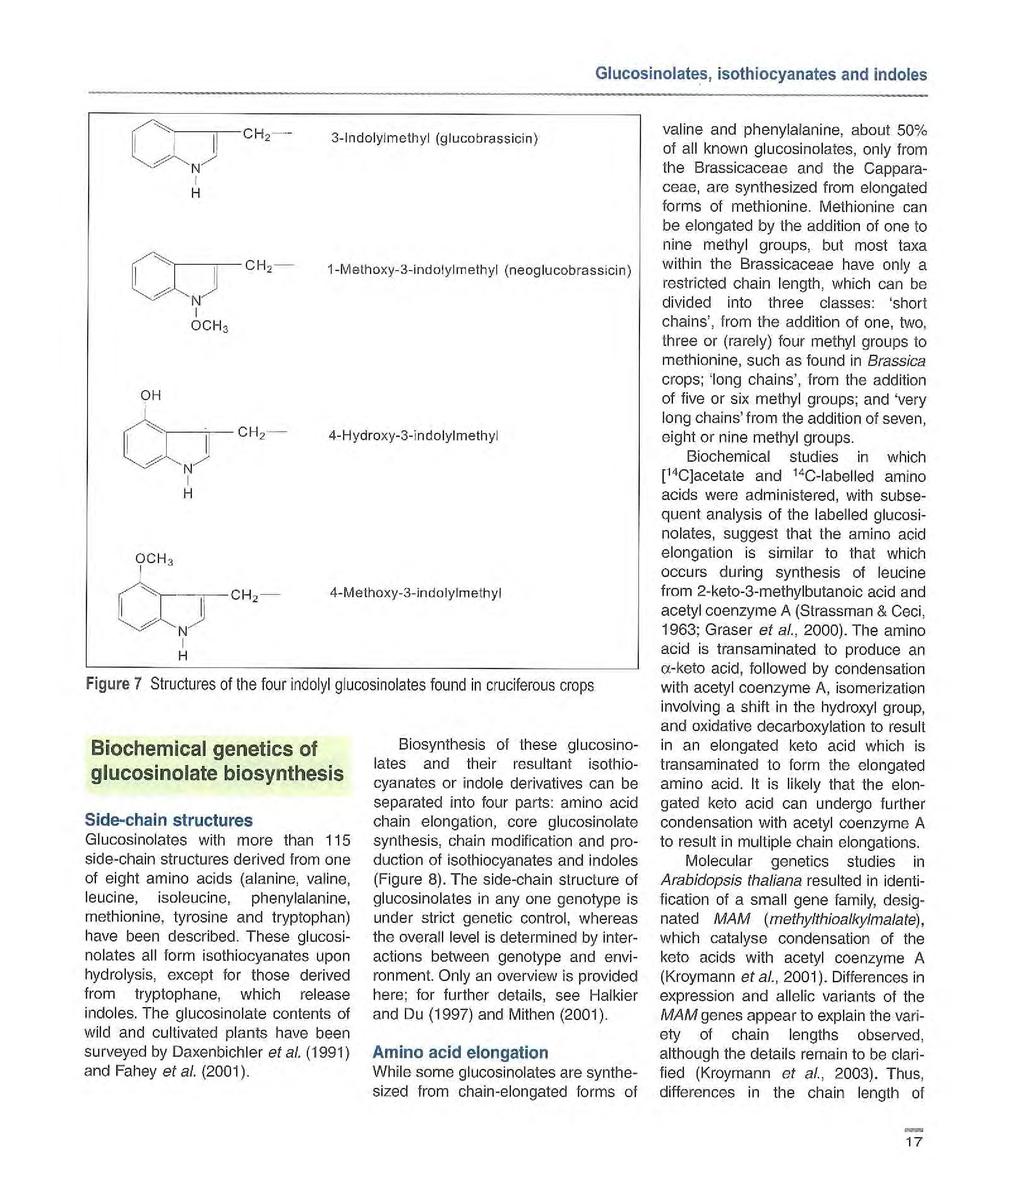 Glucosinolates, isothiocyanates and indoles OH 00H3 H H H 00H3 Biochemical genetics of glucosinolate biosynthesis Side-chain structures Glucosinolates with more than 115 side-chain structures derived